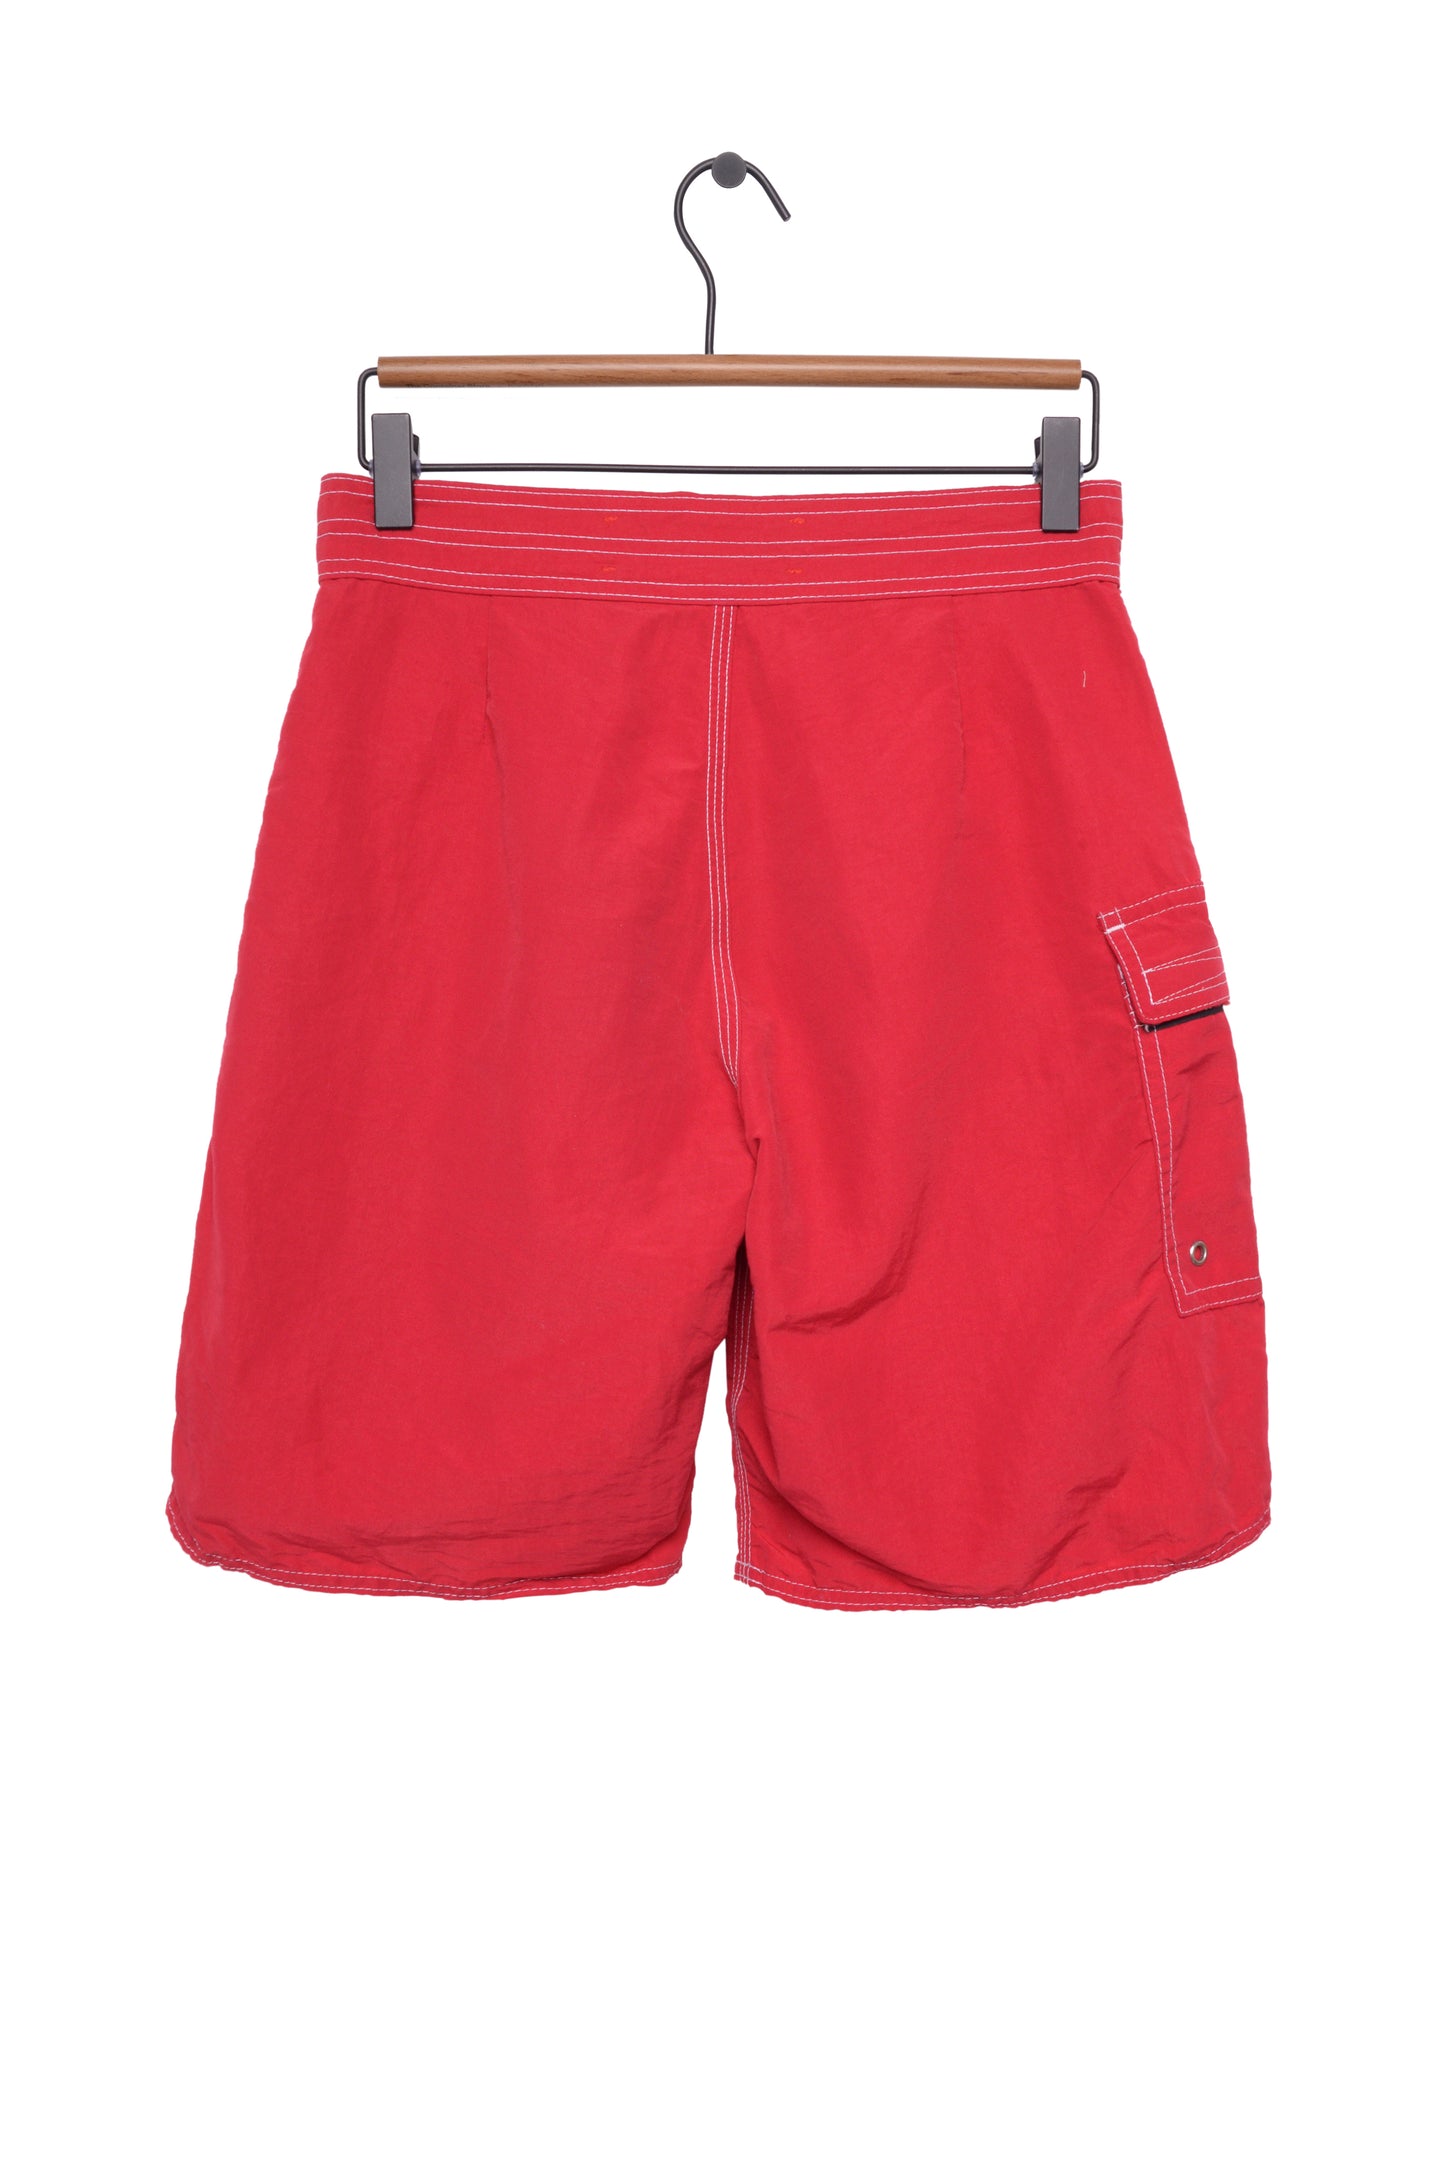 Red Athletic Trunks